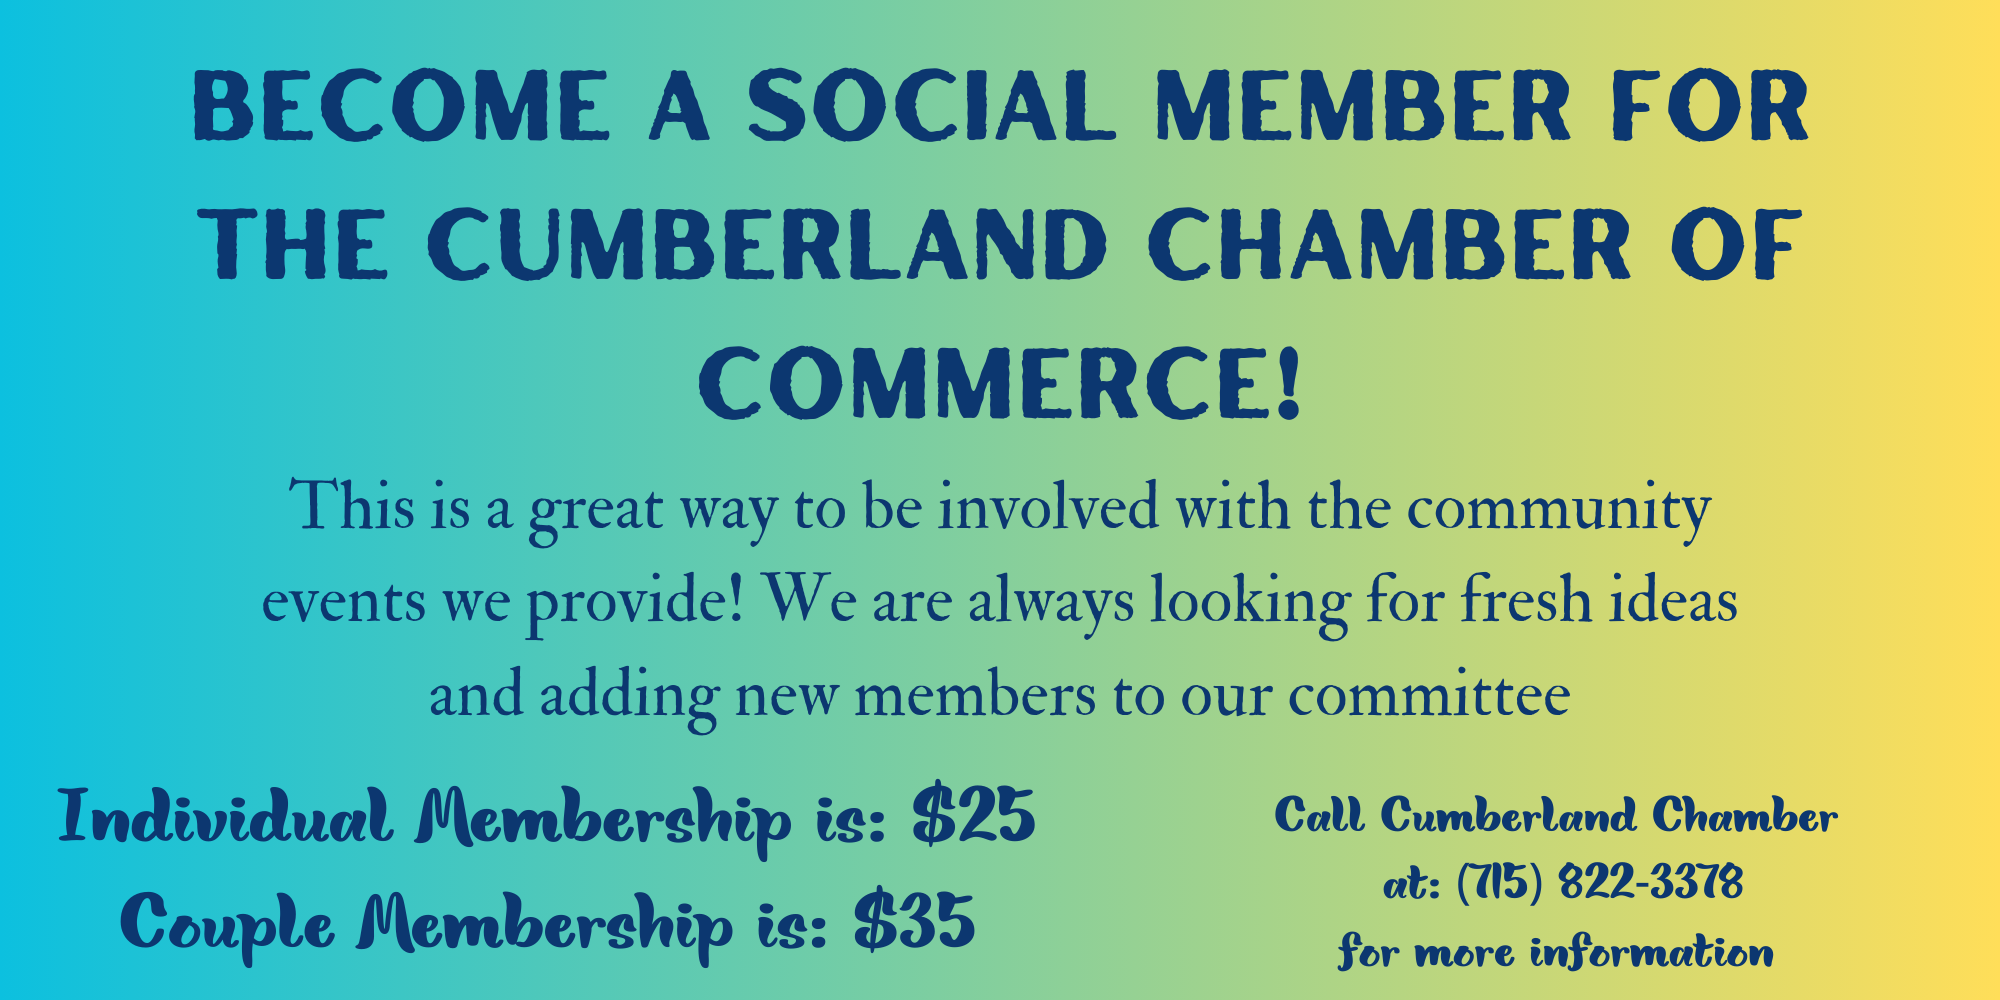 Become a Social Member for the Cumberland Chamber of Commerce